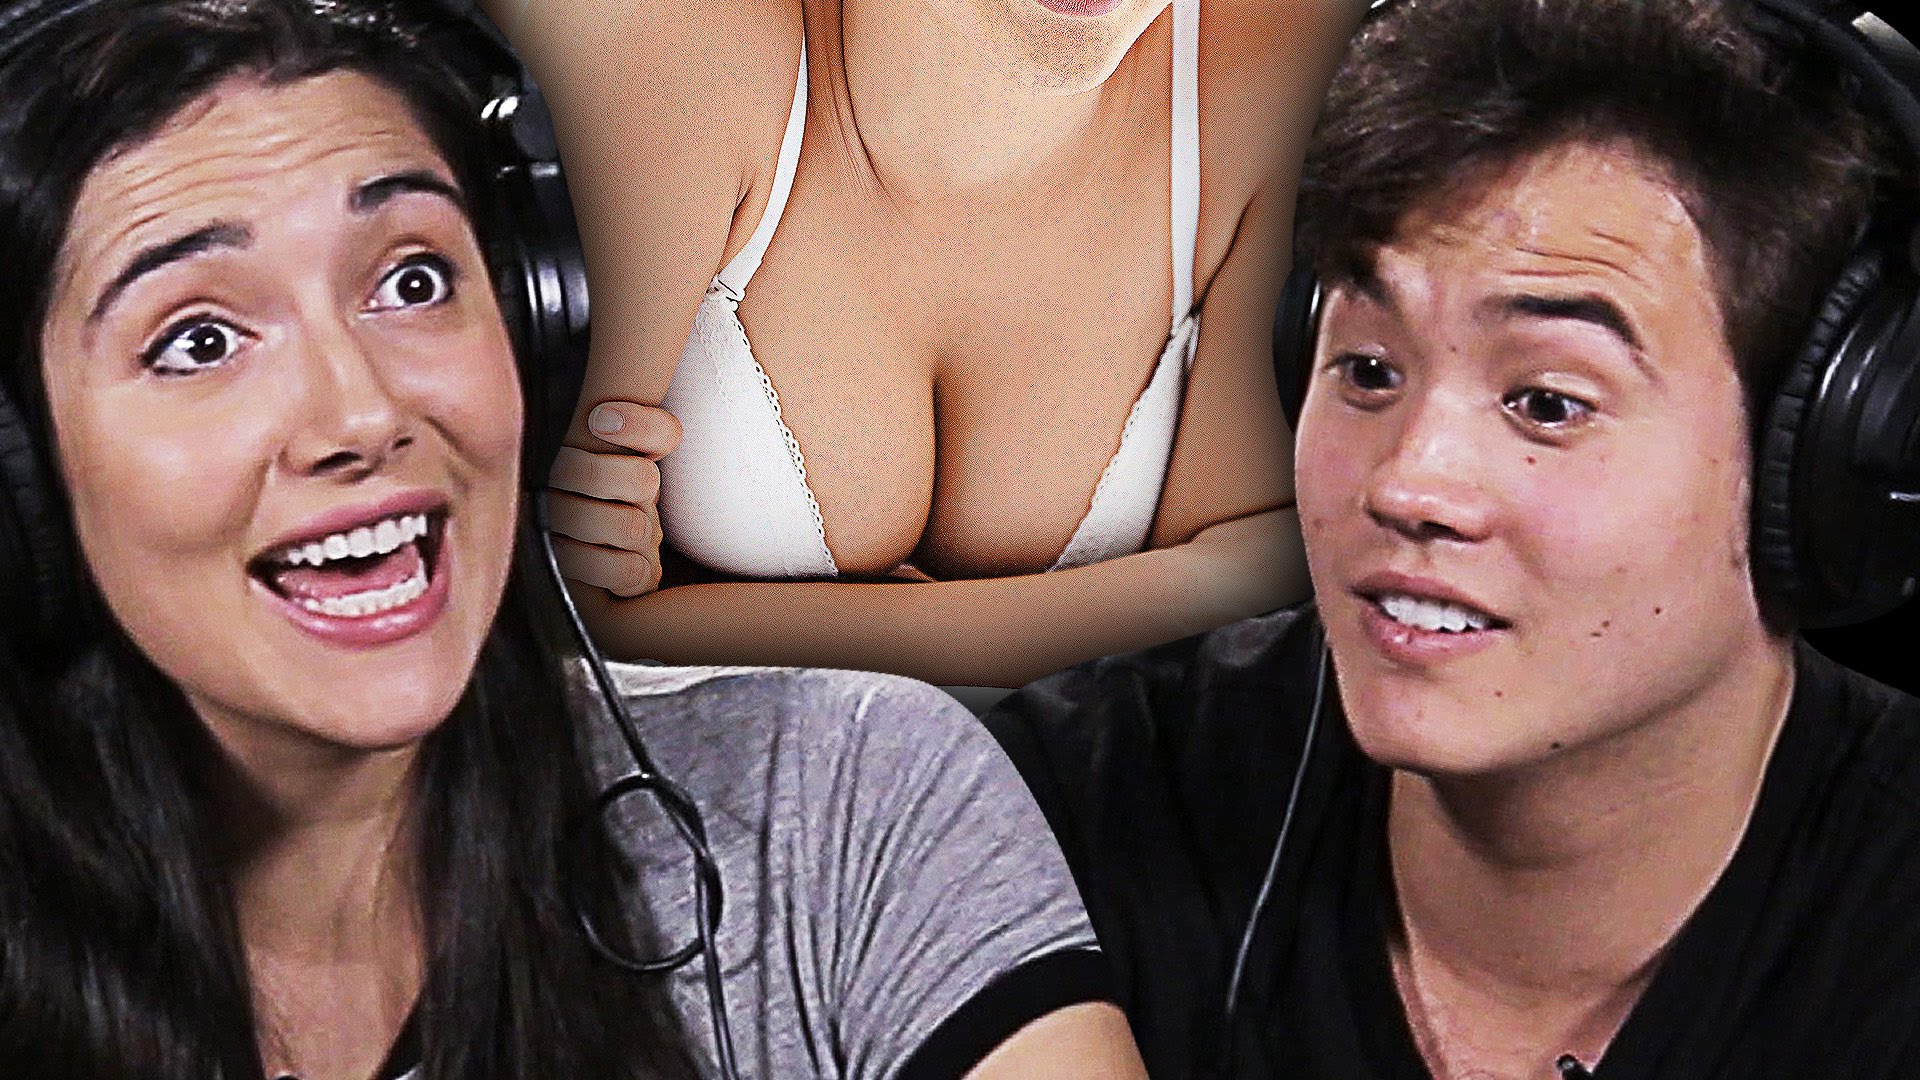 Couples Watching Porn Real - BuzzFeed Video - Couples Watch Hardcore Porn Together